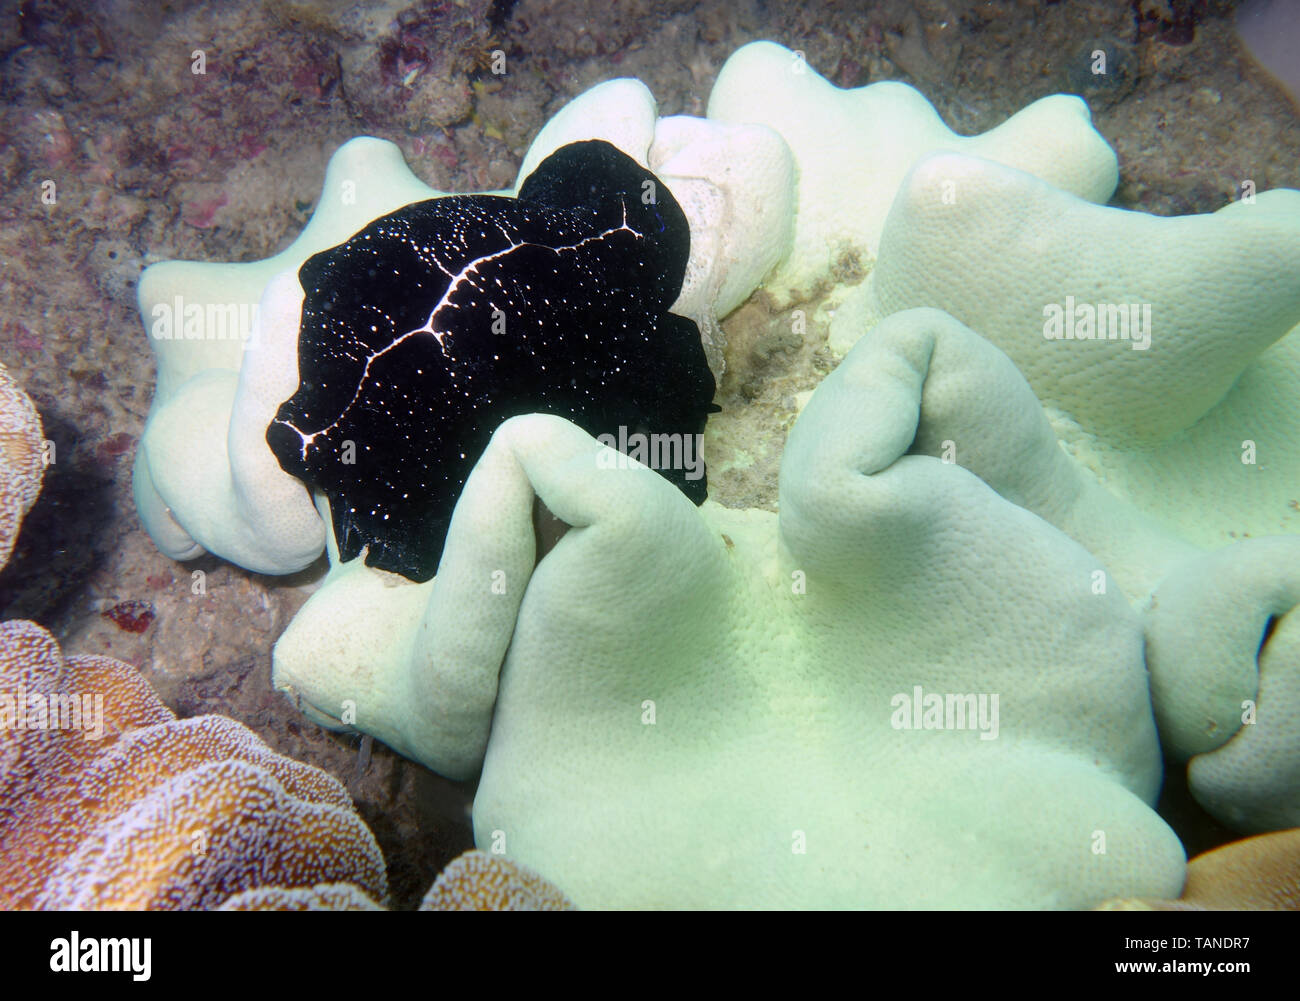 Egg (Ovula ovum) eating leather coral, Fitzroy Island, Great Barrier Reef, near Cairns, Queensland, Australia Stock Photo - Alamy